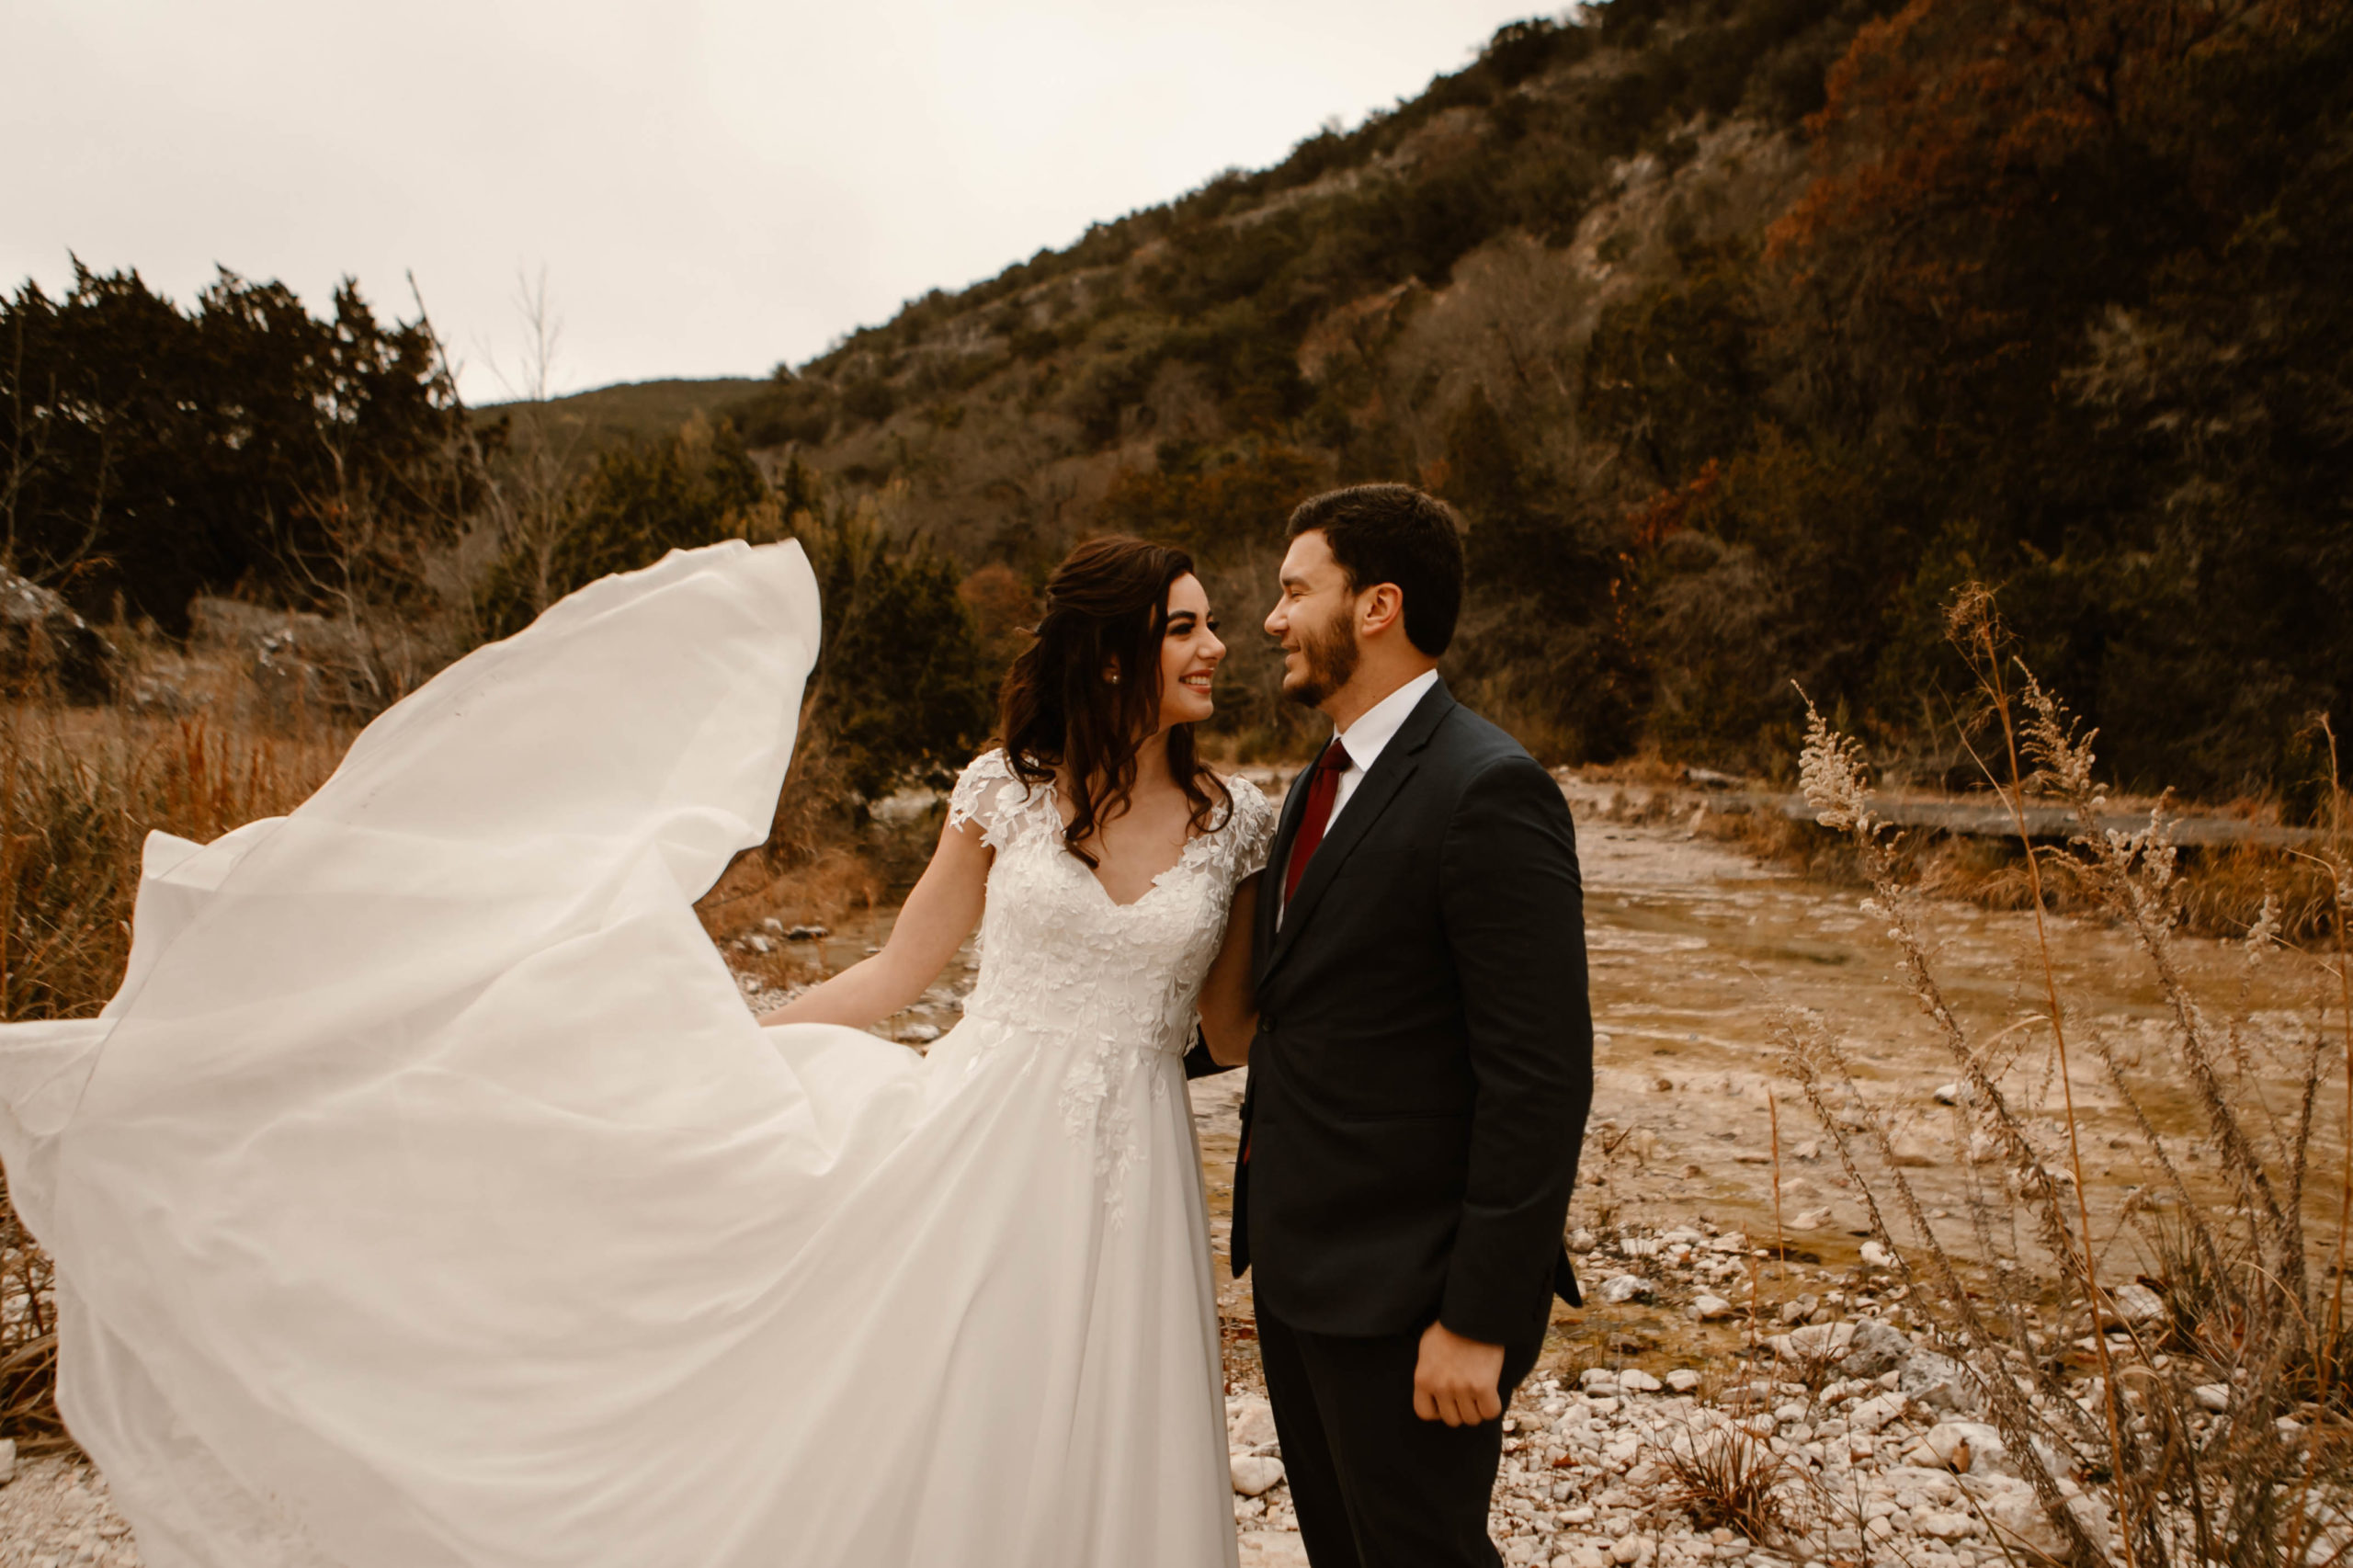 Lost Maples Elopement, Lost Maples wedding, Texas wedding photographer, texas adventure elopement, places to get married in texas, places to elope in texas, brit nicole photography